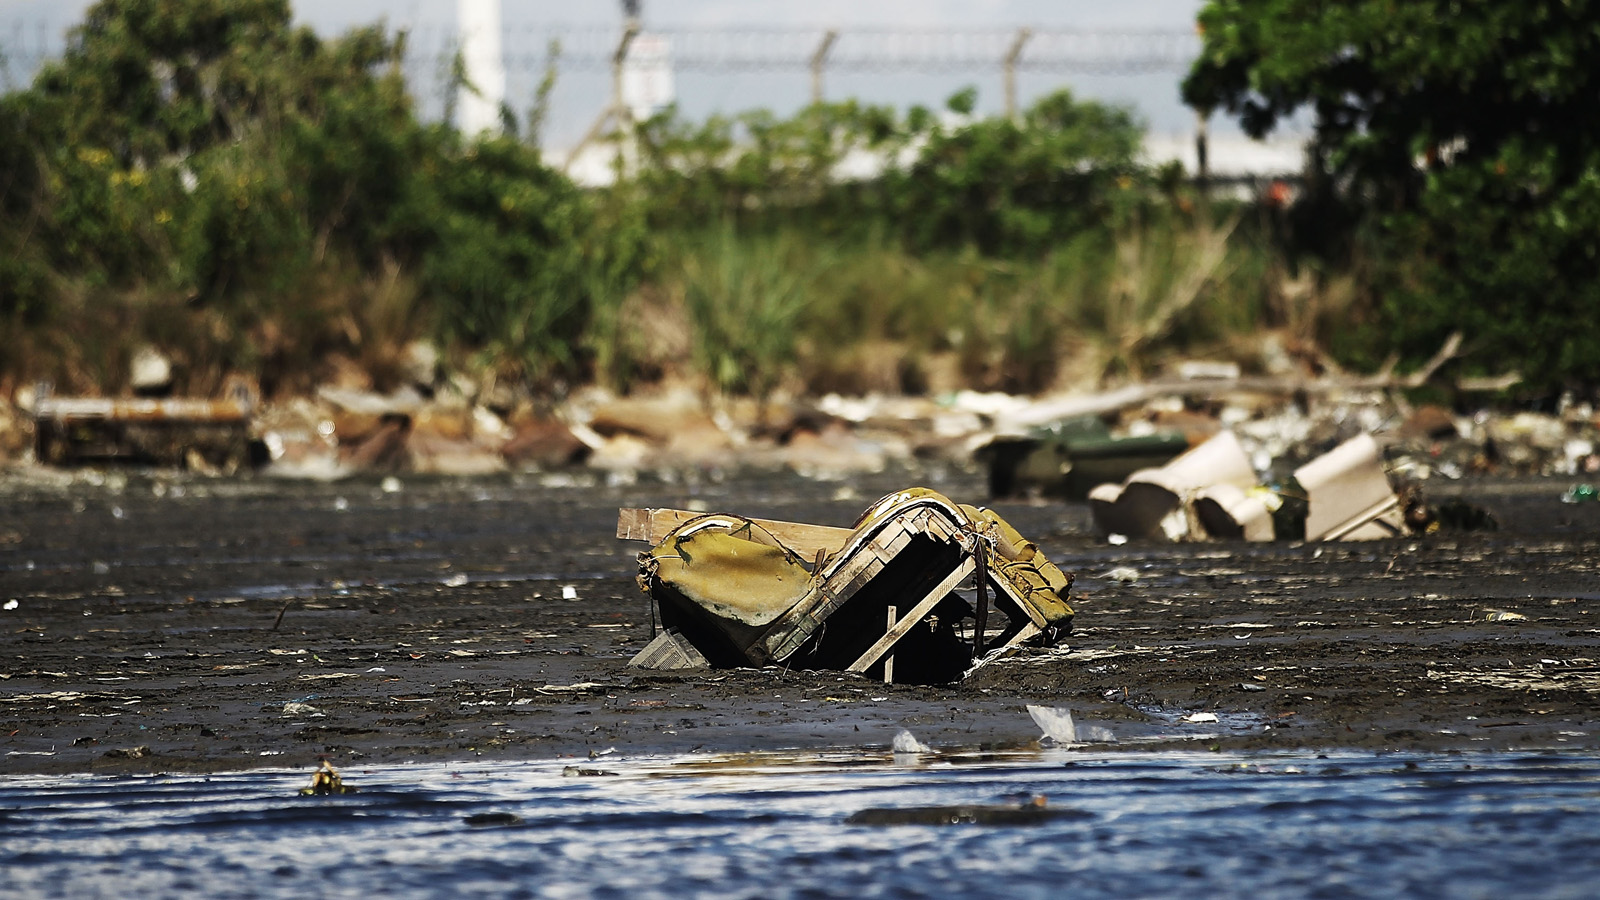 Shocking Photos From The Water Sports Site Of The Rio Olympics